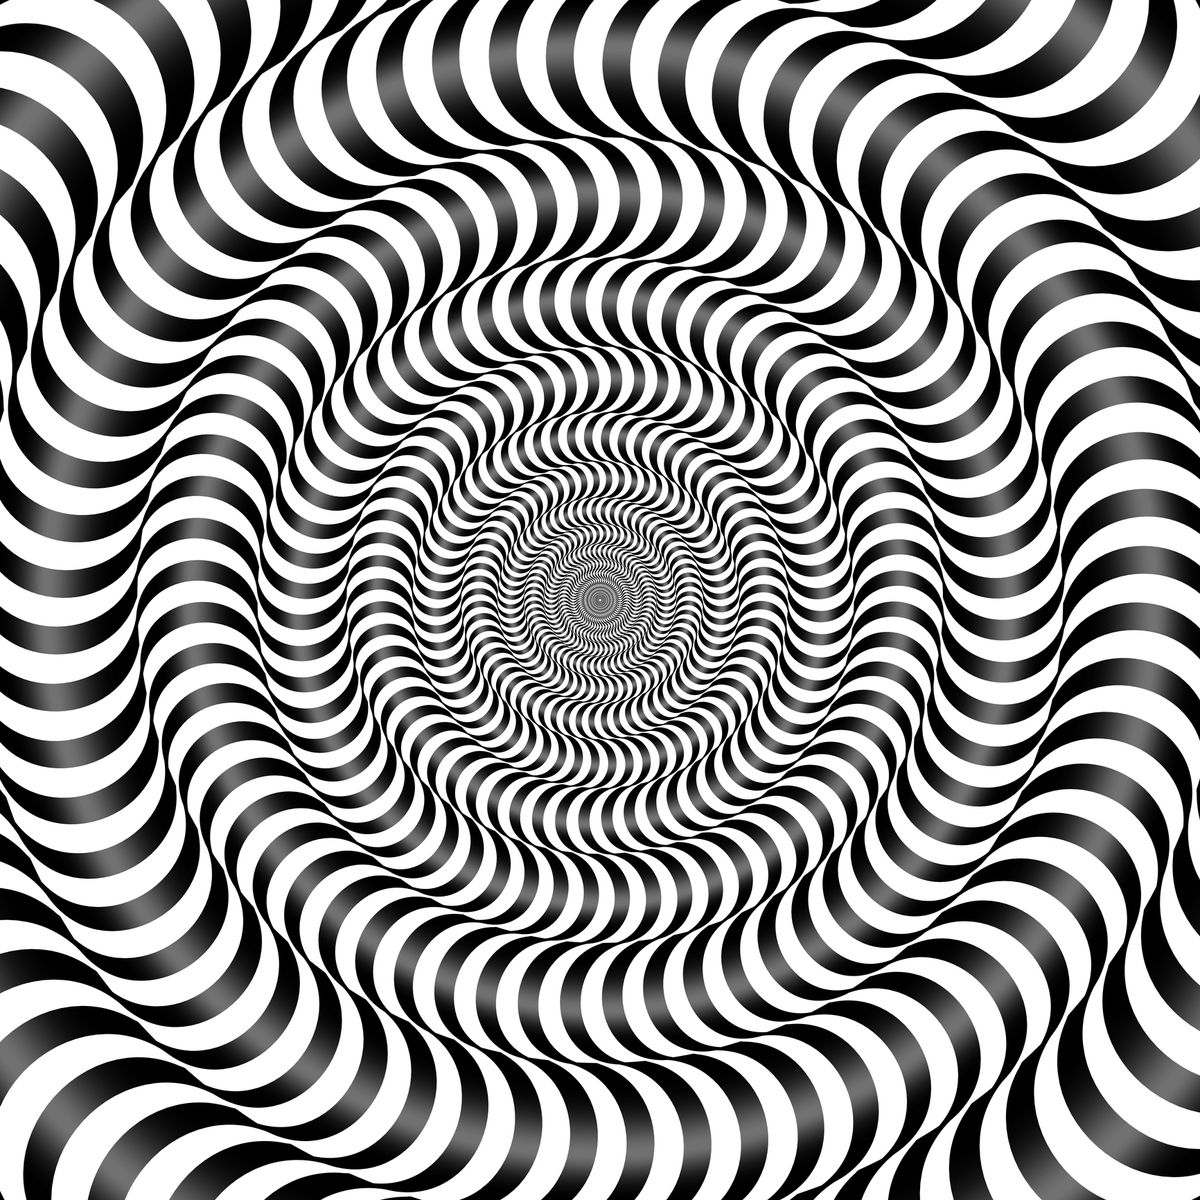 trippy pictures that move